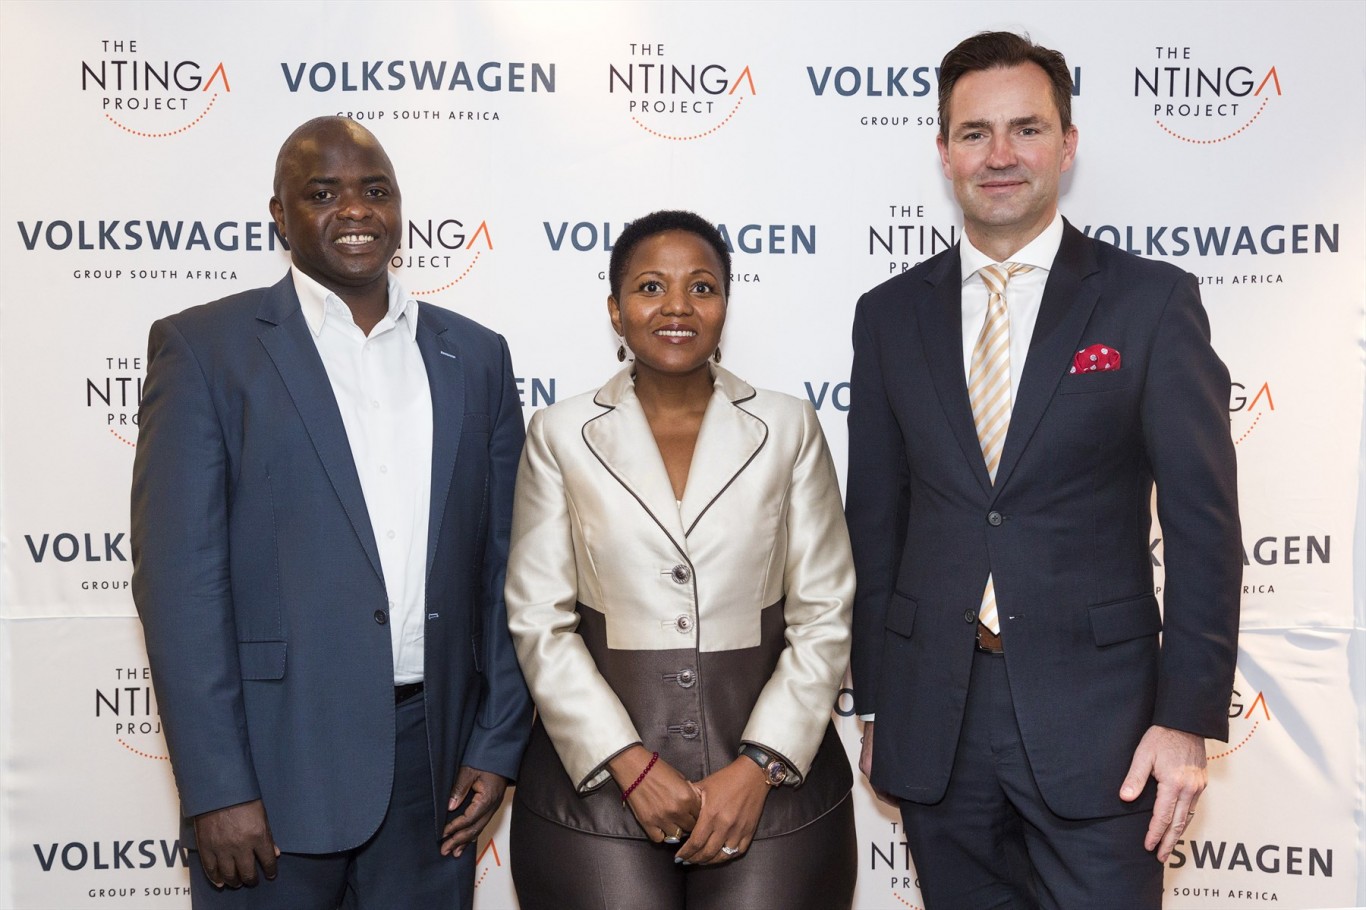 Volkswagen to Develop Black-Owned Suppliers